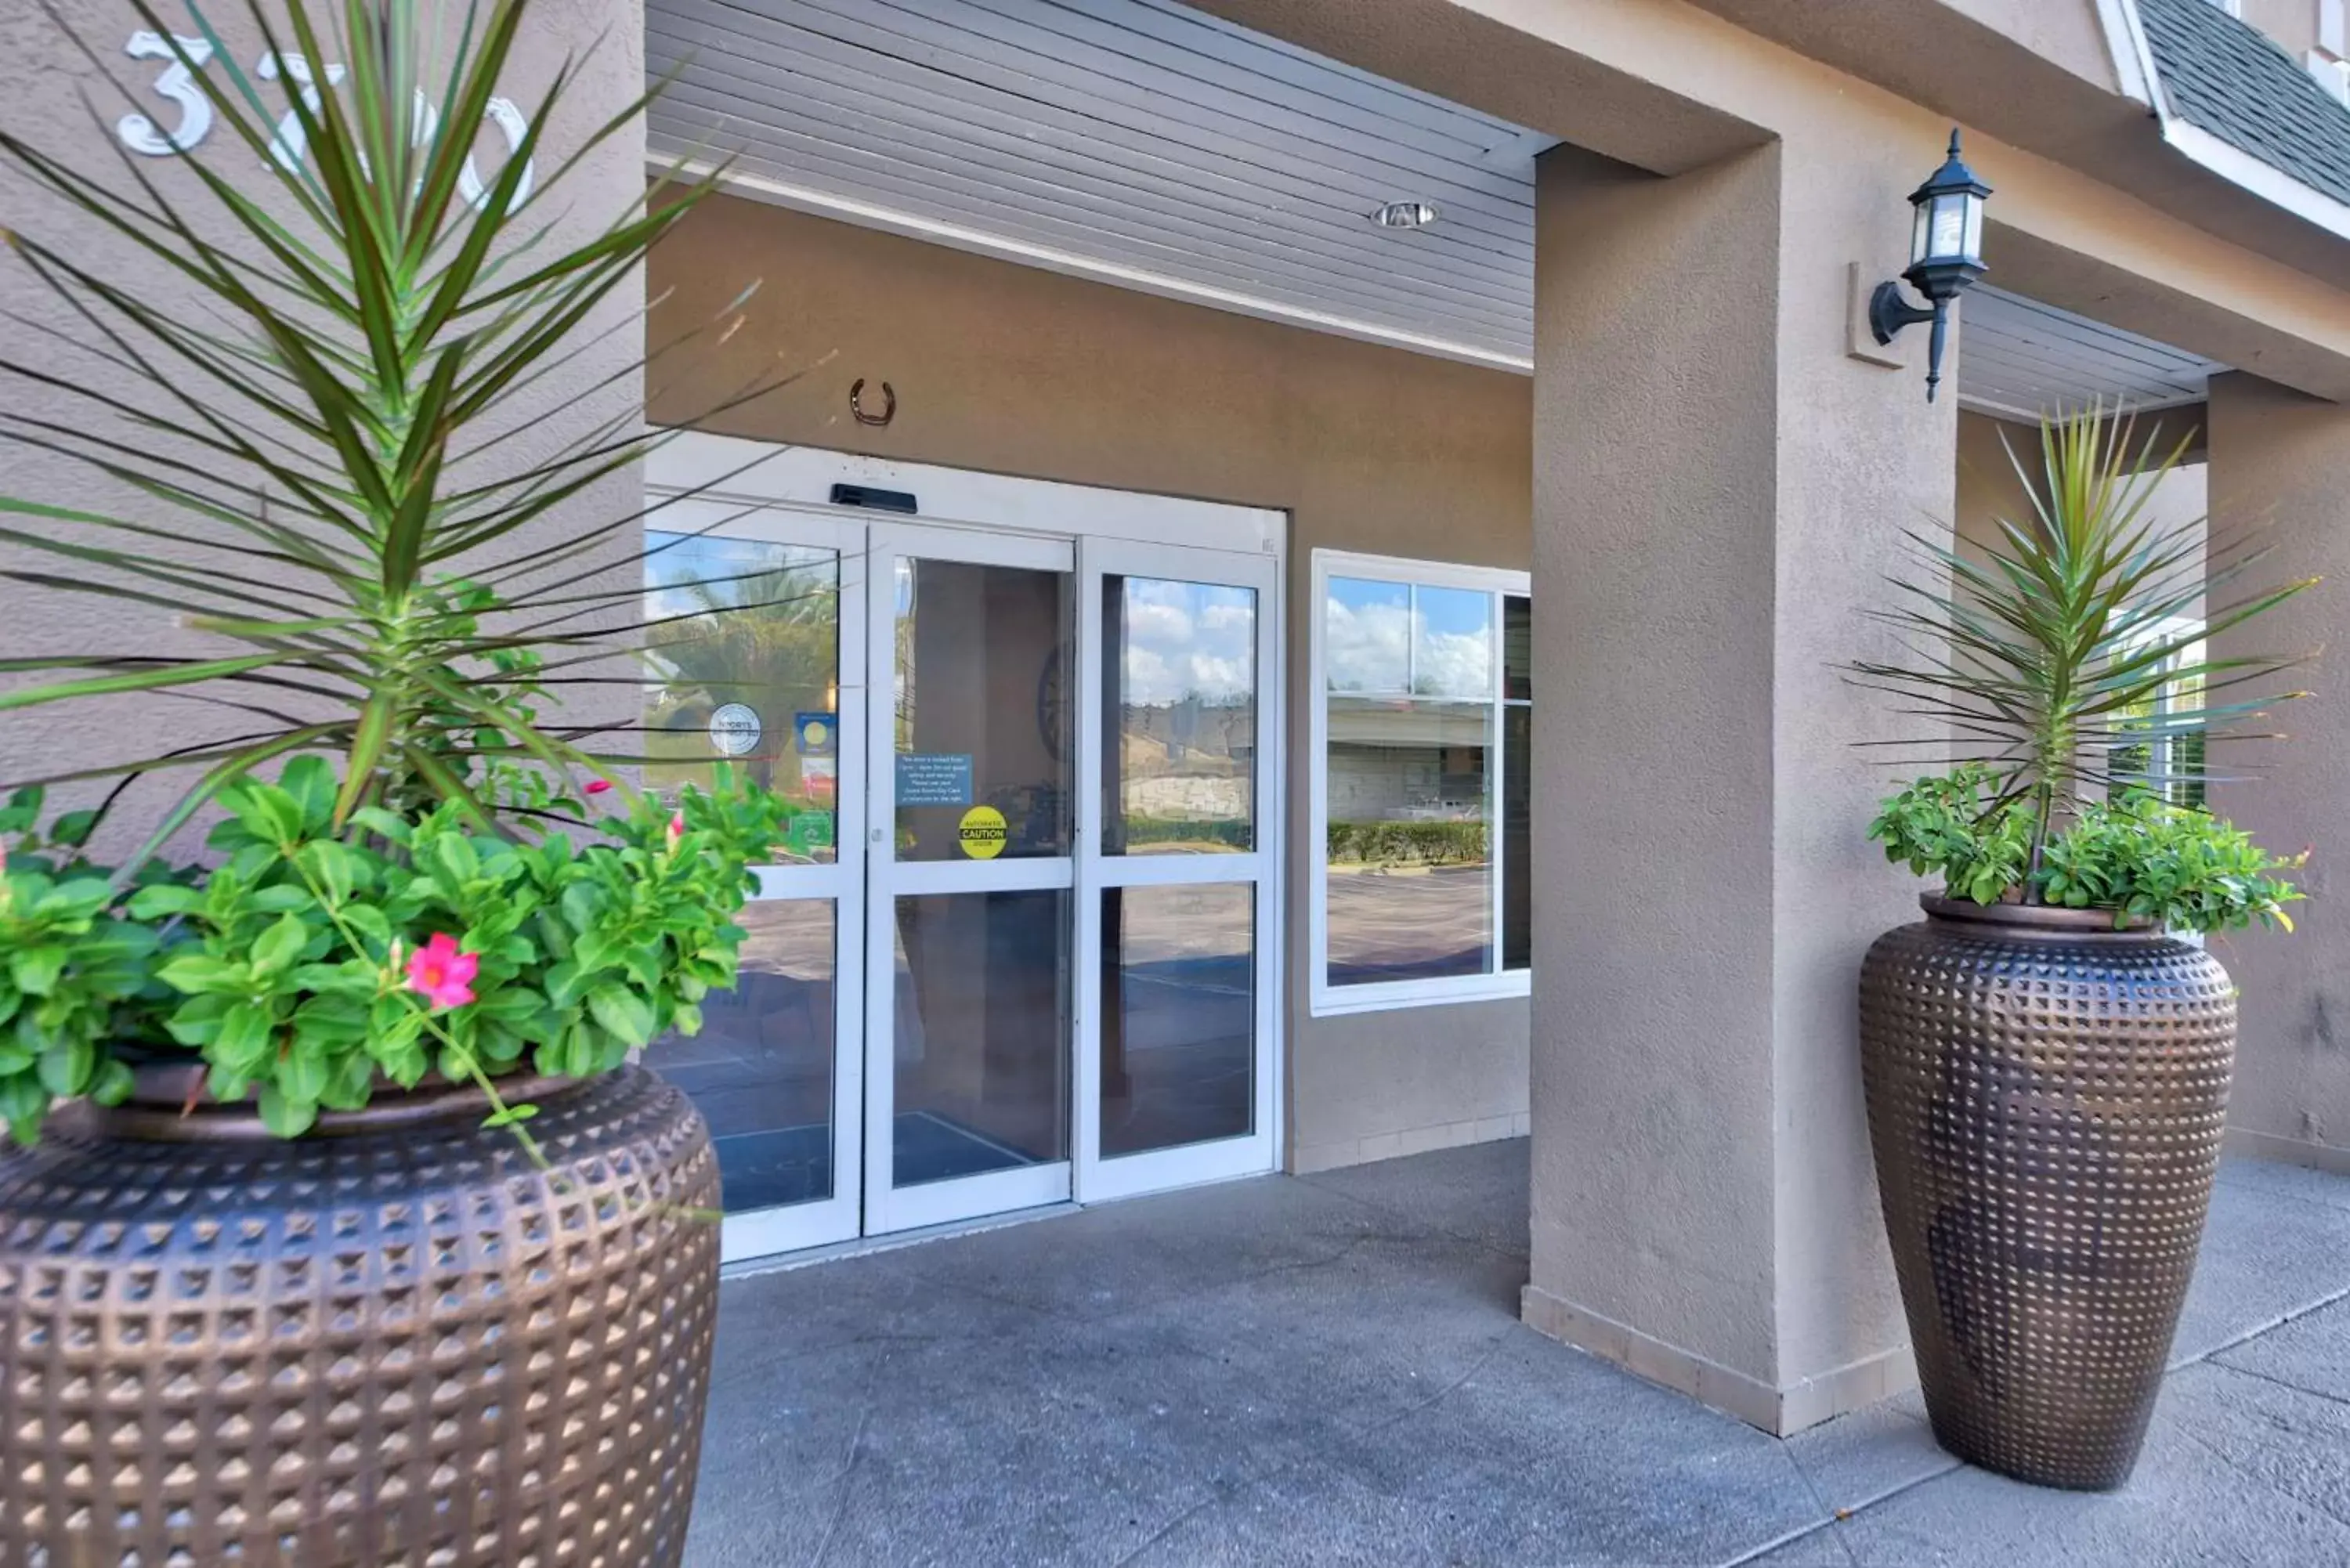 Facade/entrance in Country Inn & Suites by Radisson, Ocala, FL